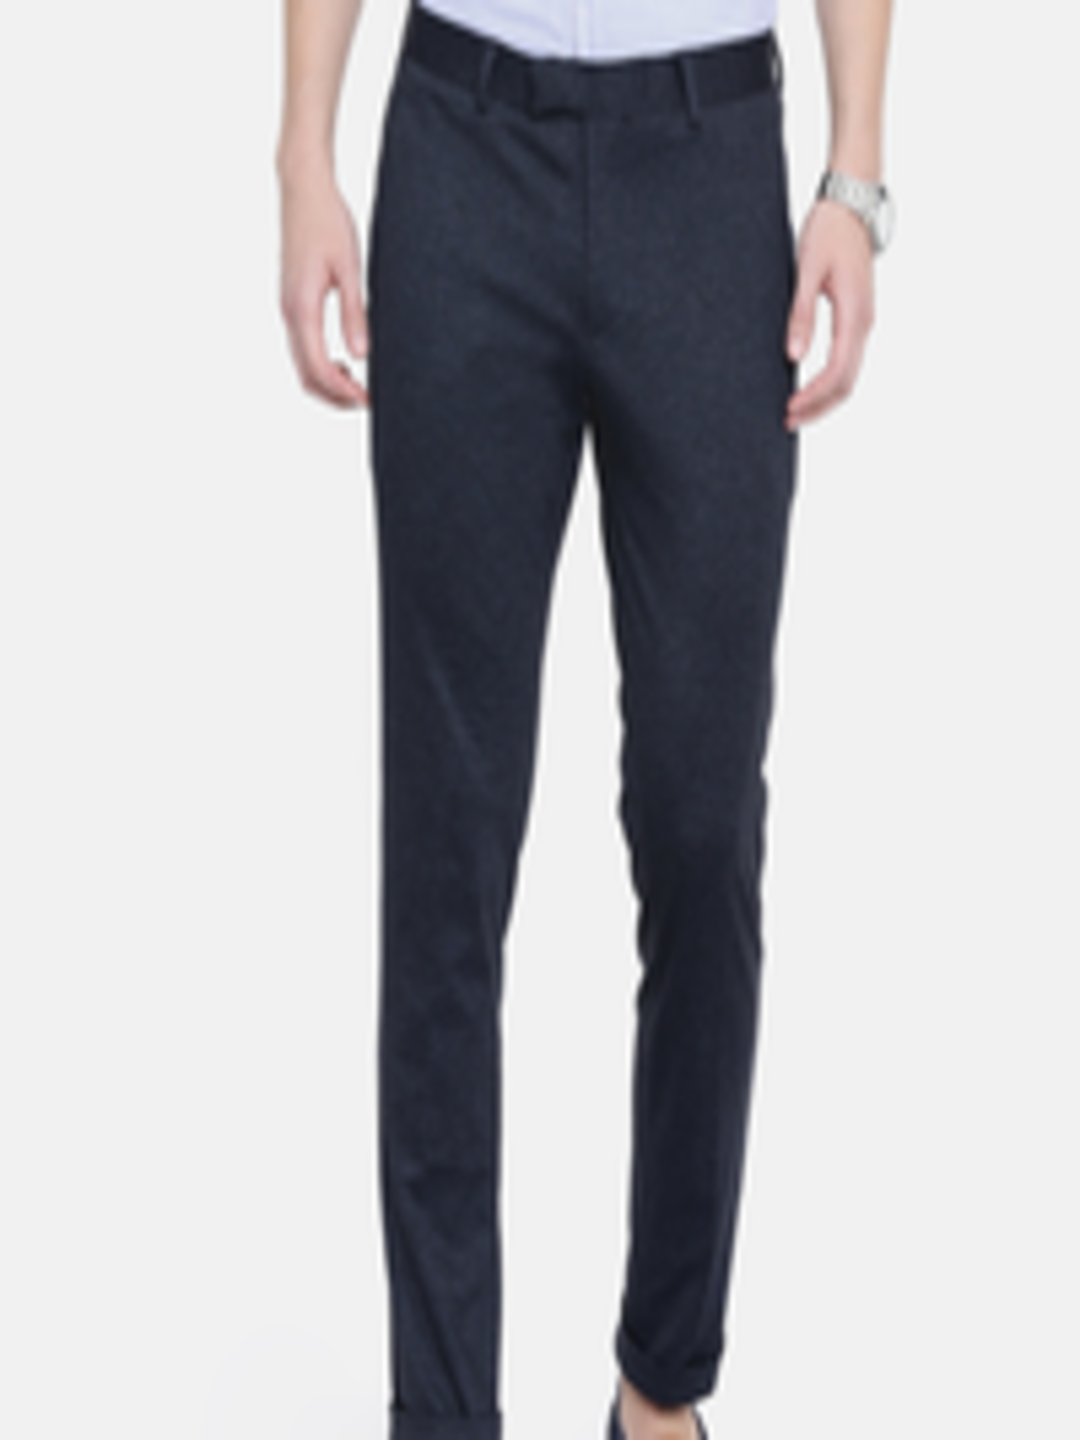 Buy SELECTED Men Navy Blue Regular Fit Solid Formal Trousers - Trousers ...